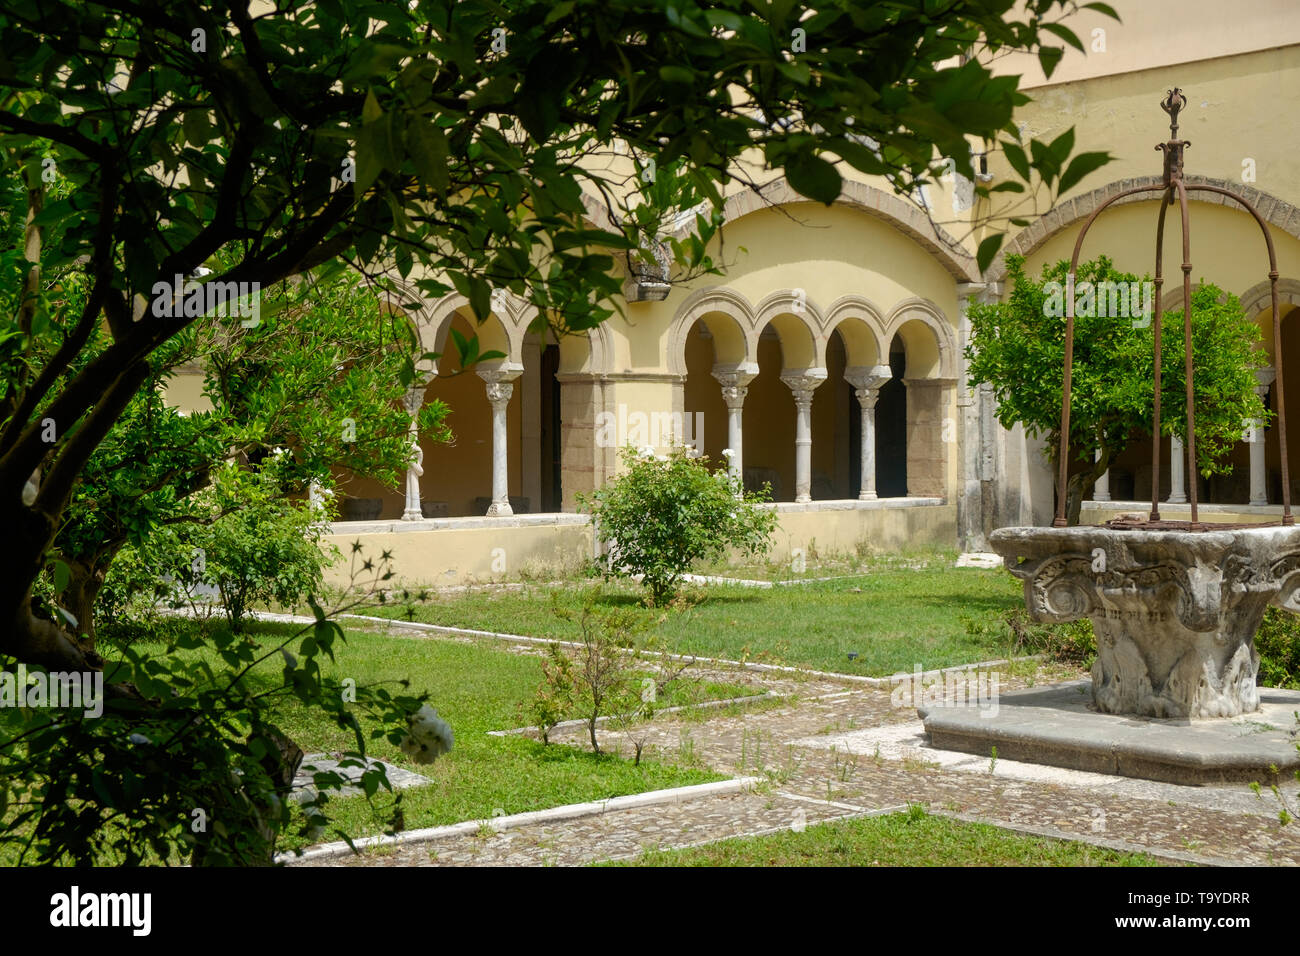 The Santa Sofia cloister in Benevento is a romanesque masterpiece and has a peaceful garden that you can see while visiting the 'Museo del Sannio'. Stock Photo